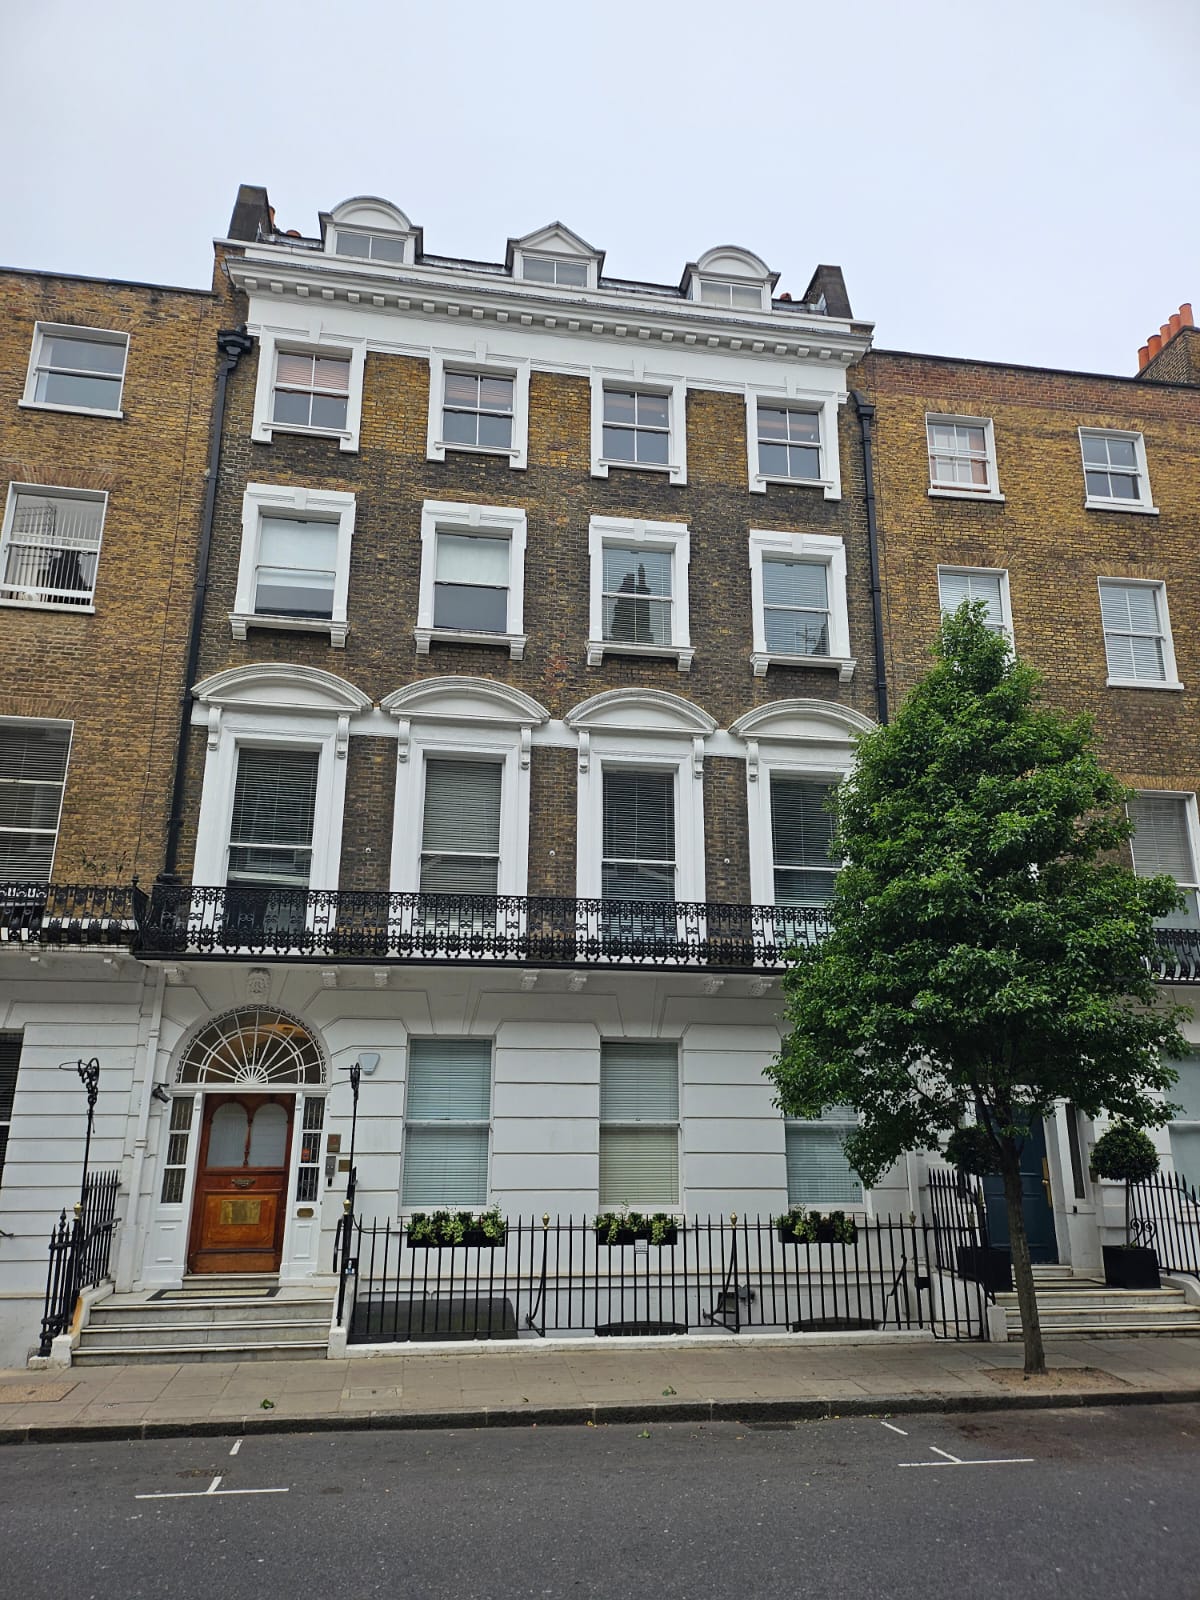 81 Harley Street is typical London townhouses, with four stories and attics, rectangular Georgian windows and a plastered ground floor and brick above. There is a tree growing on the street, on the right hand side as you look at the house.